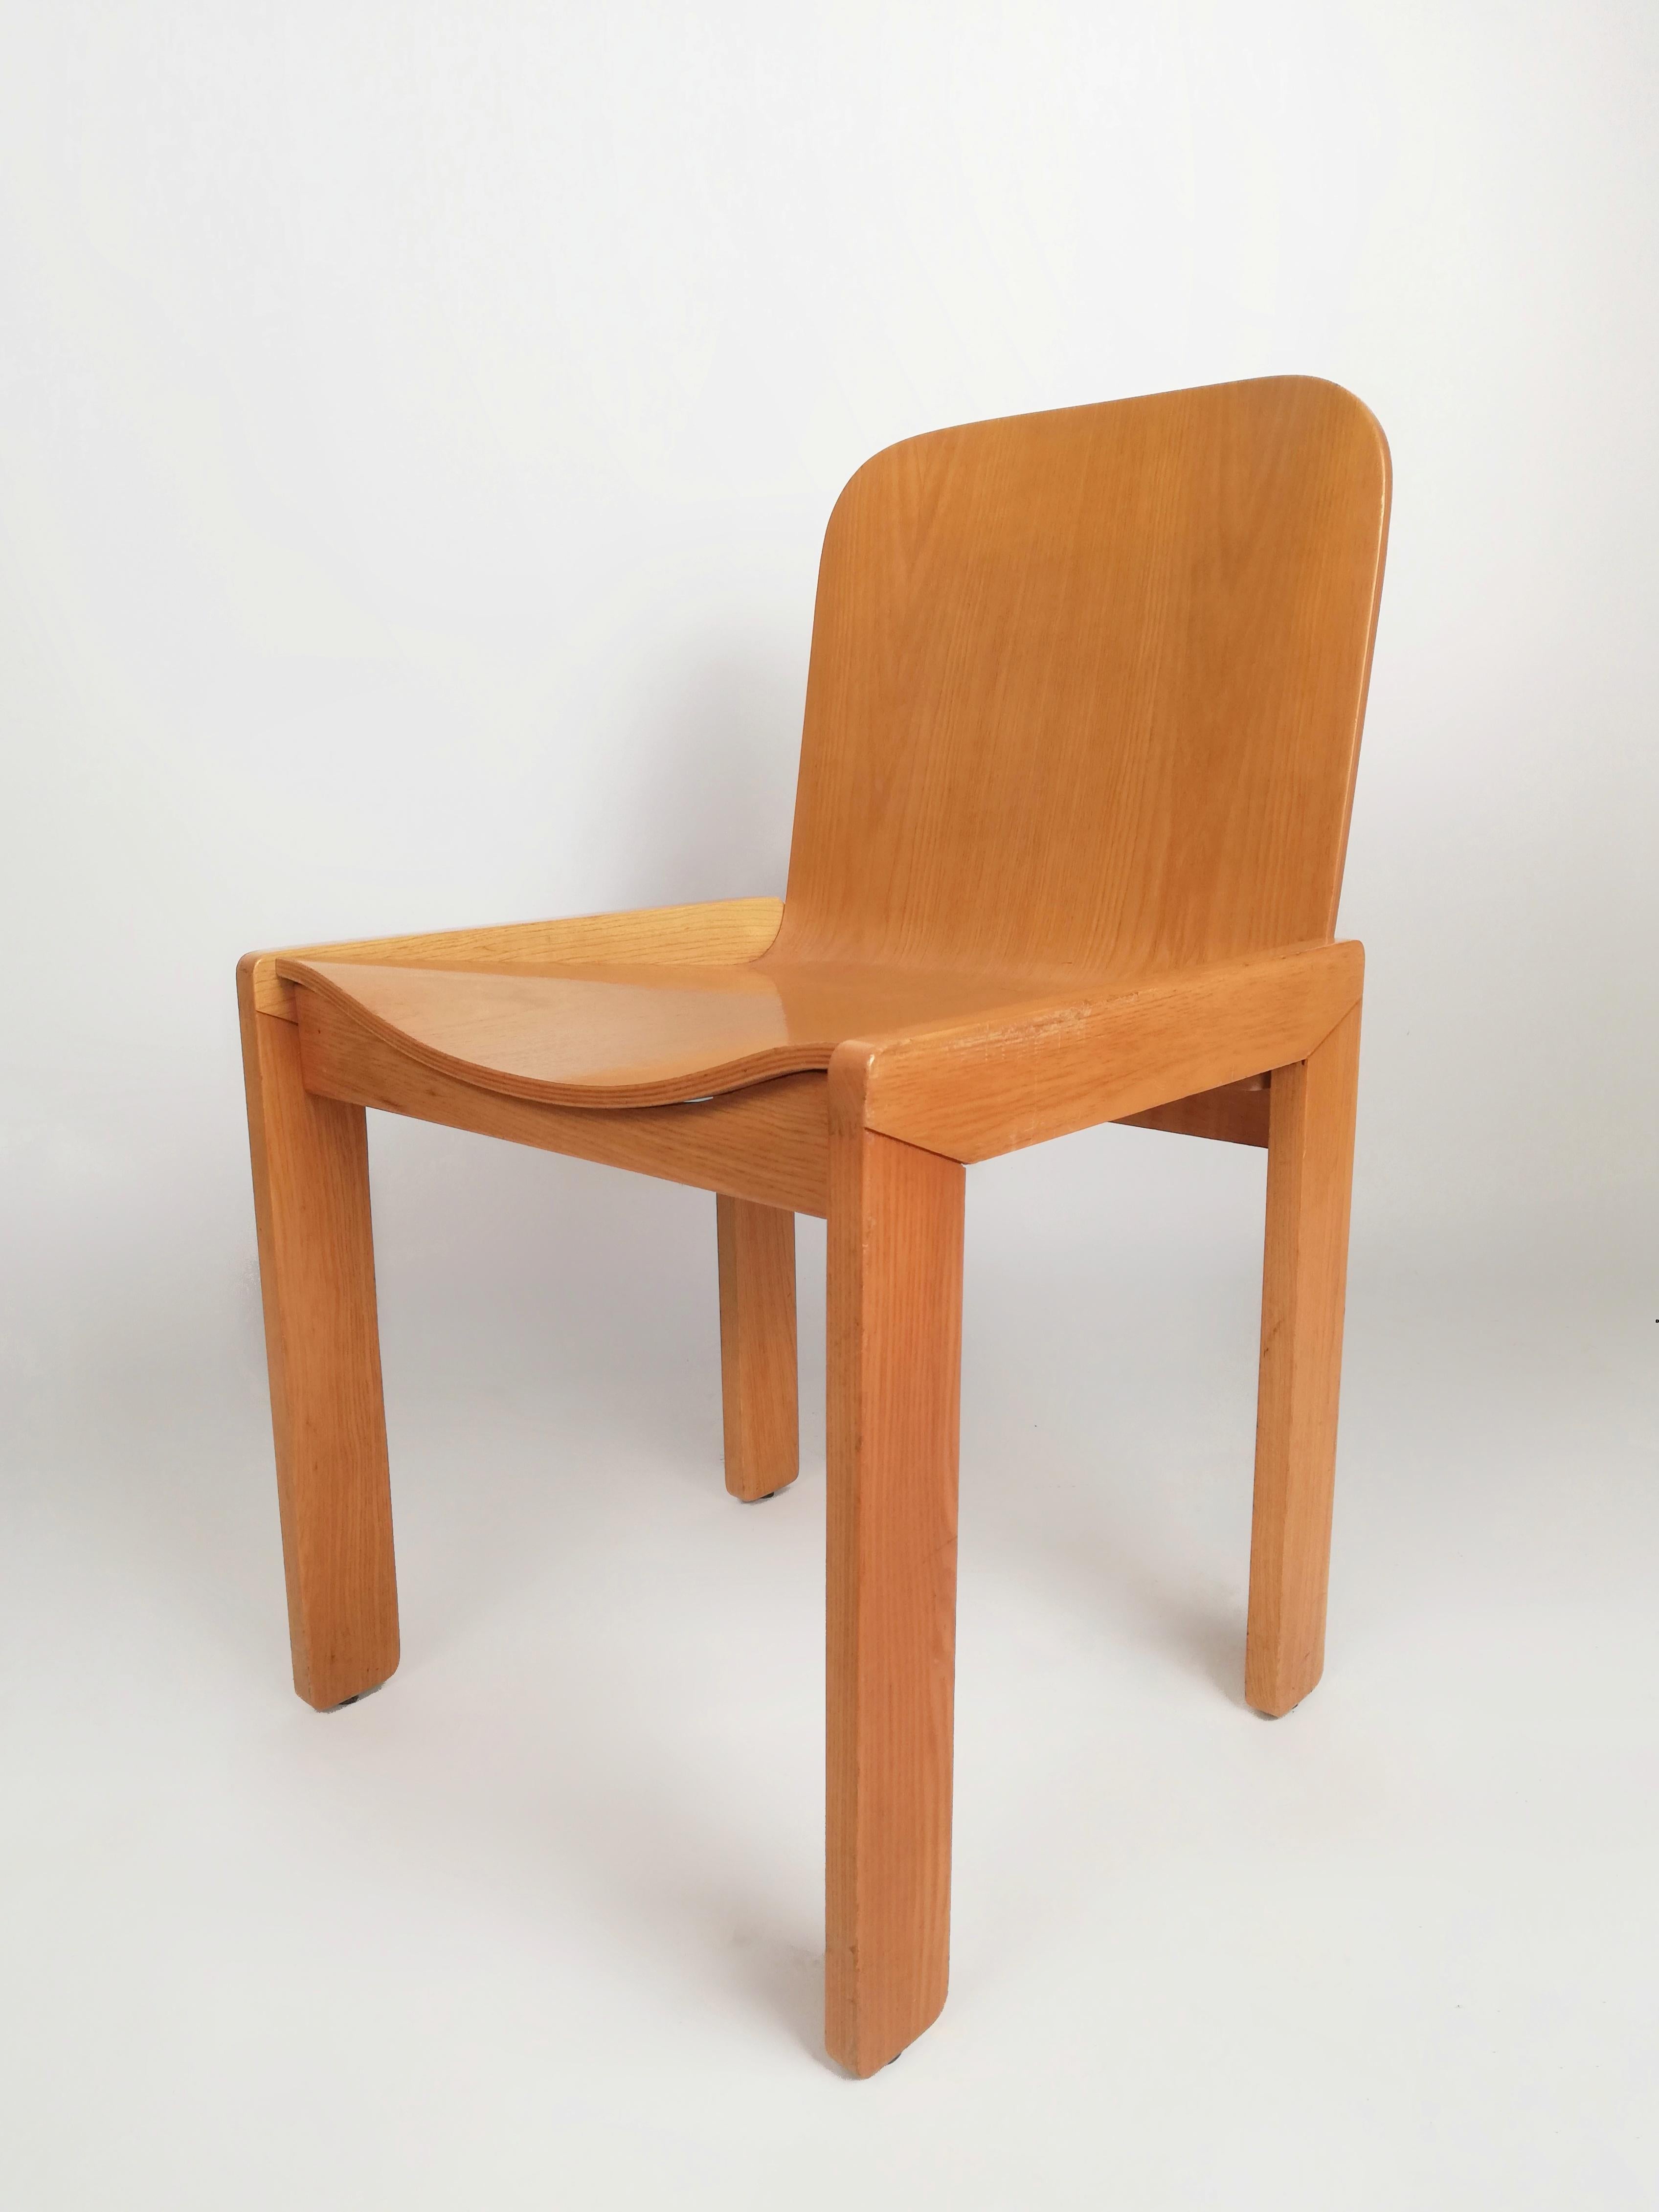 A set of six chairs produced in Italy by the historic Molteni company, dating back to the 70s and 80s
Made of curved plywood veneered in ash wood which adapts, by flexing on the back and seat, to the person's posture, enveloping them.
Archetype of